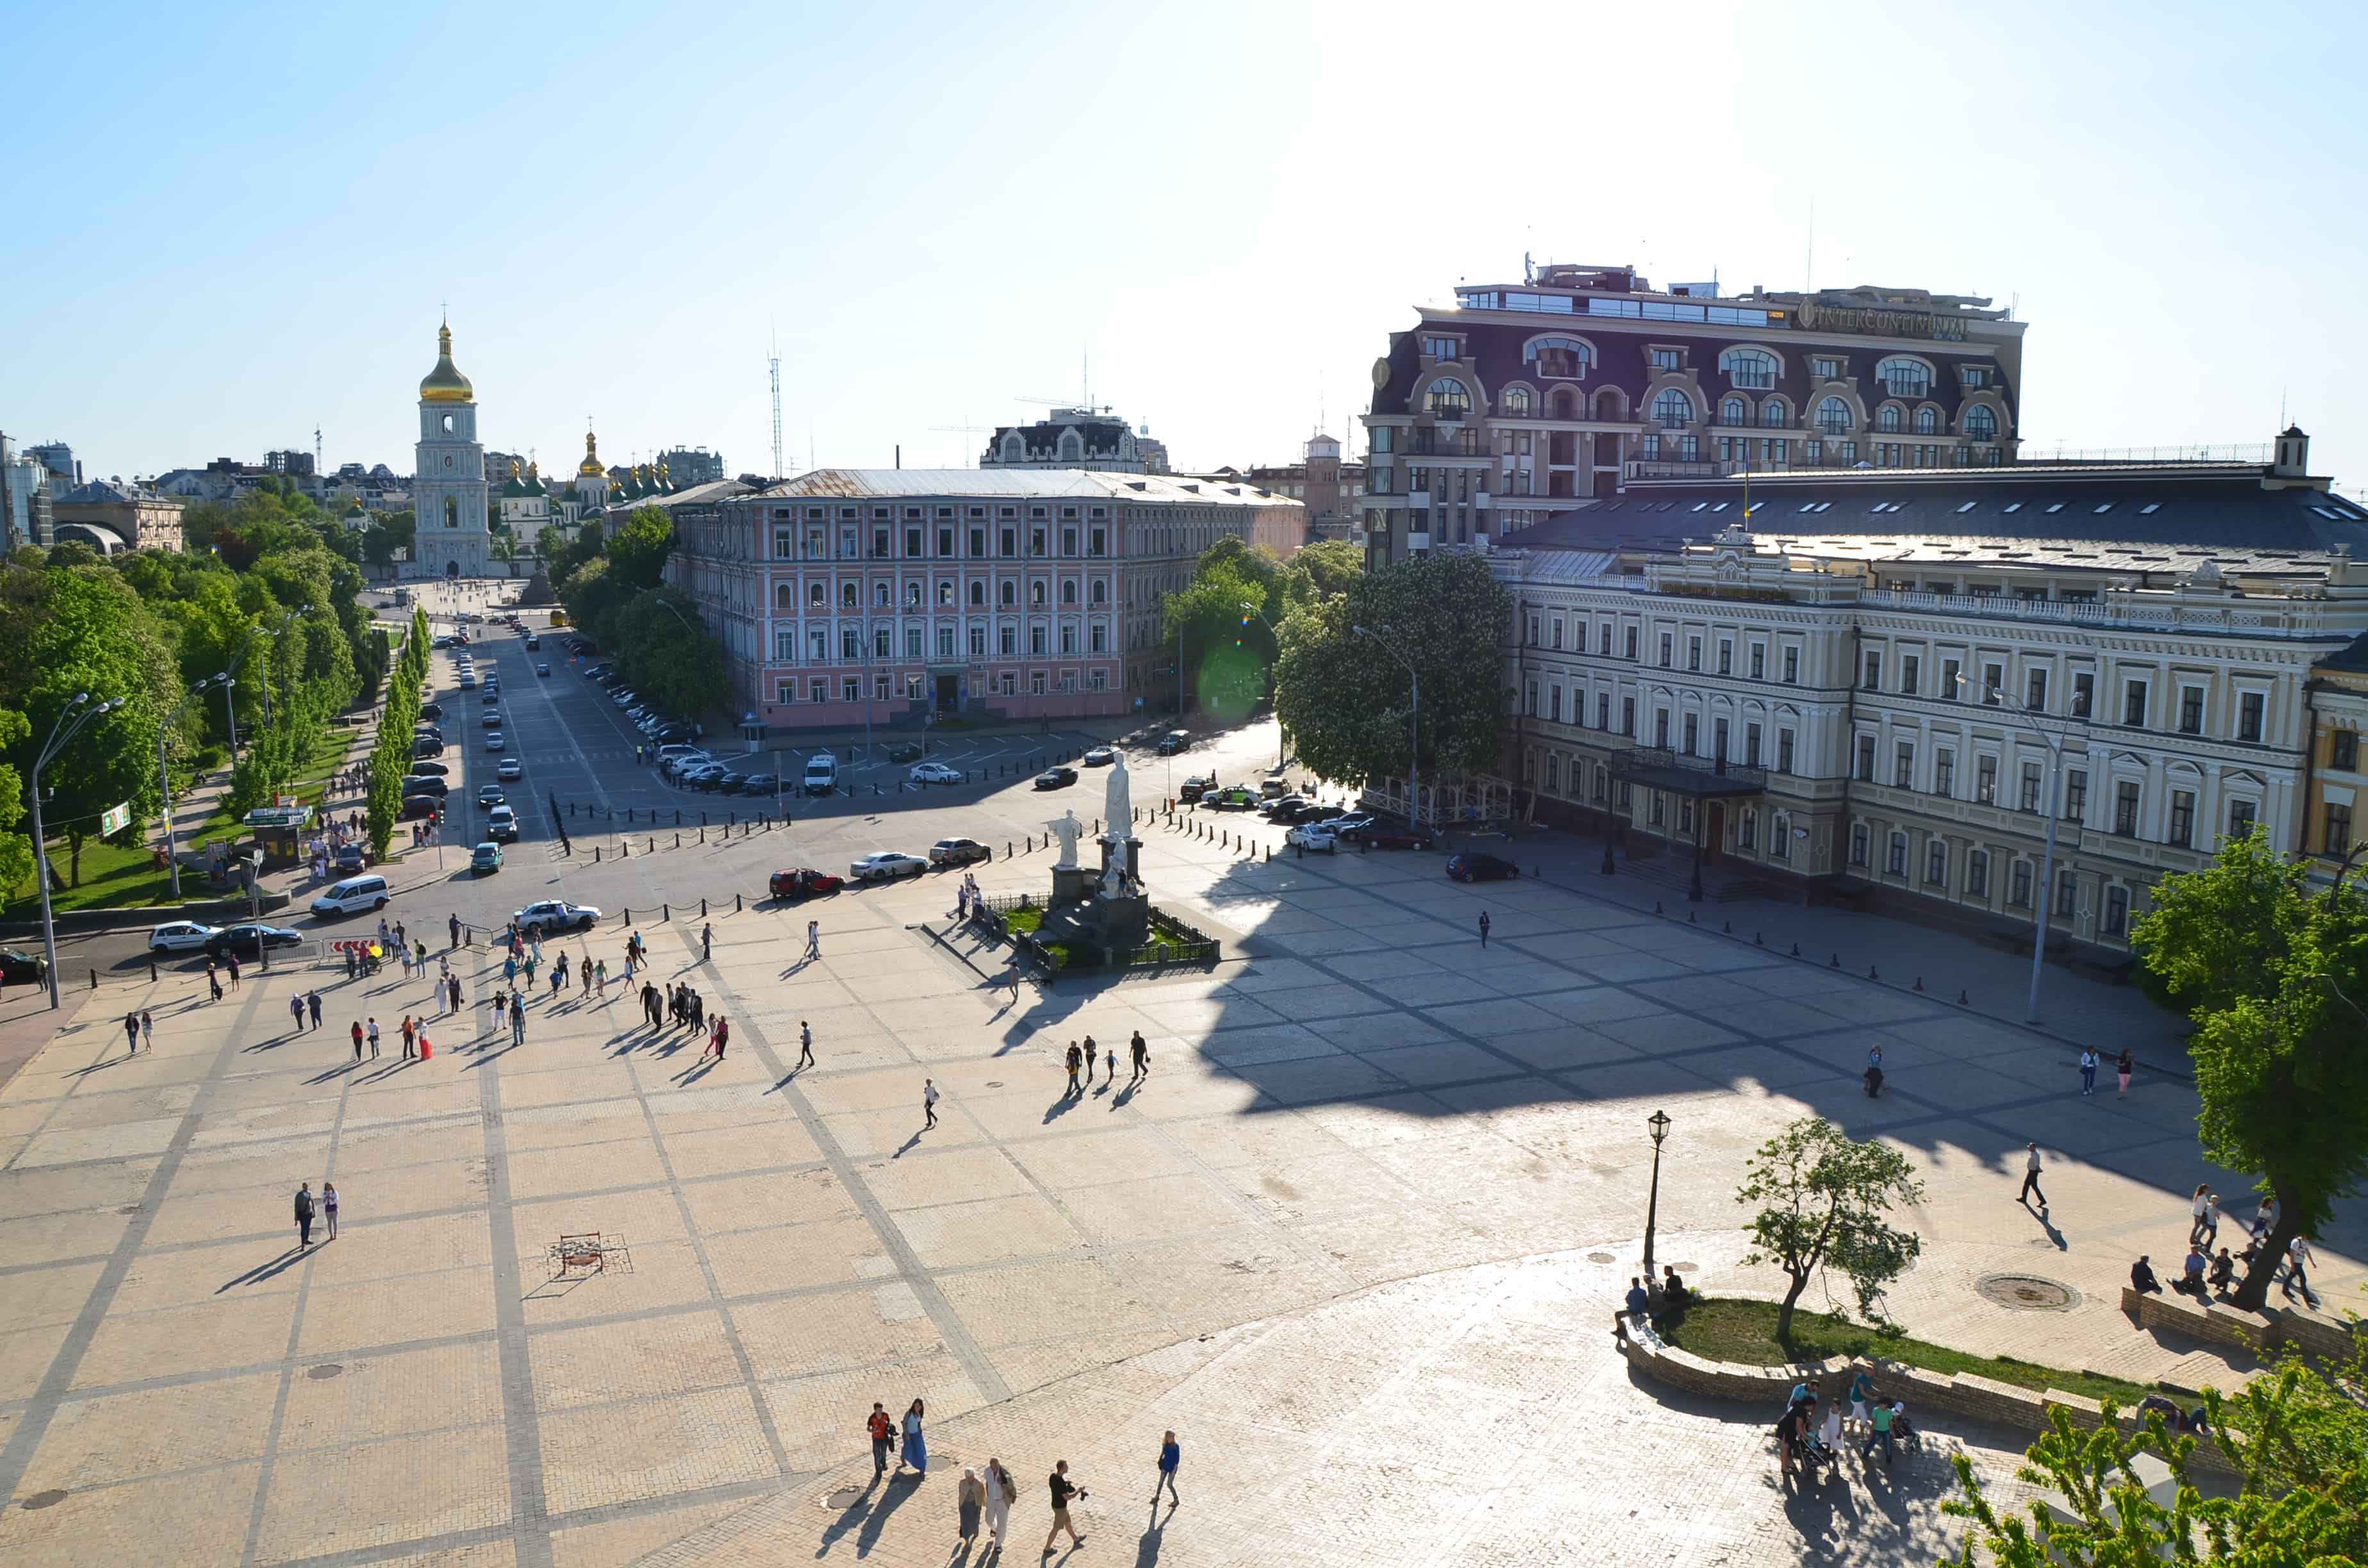 Mykhailivs'ka Square from the bell tower at St. Michael's Golden-Domed Monastery in Kyiv, Ukraine